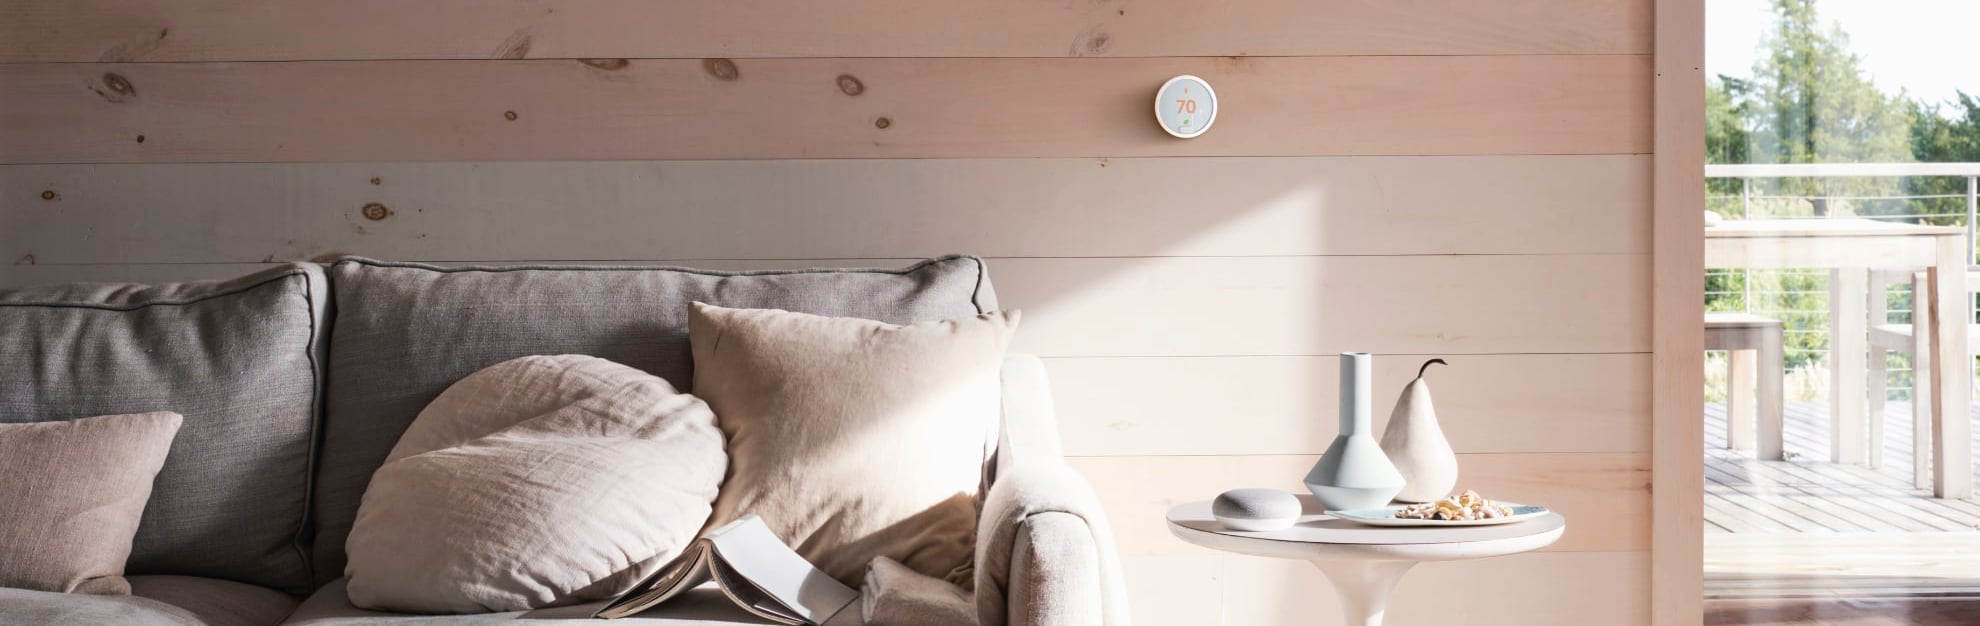 Vivint Home Automation in Charleston